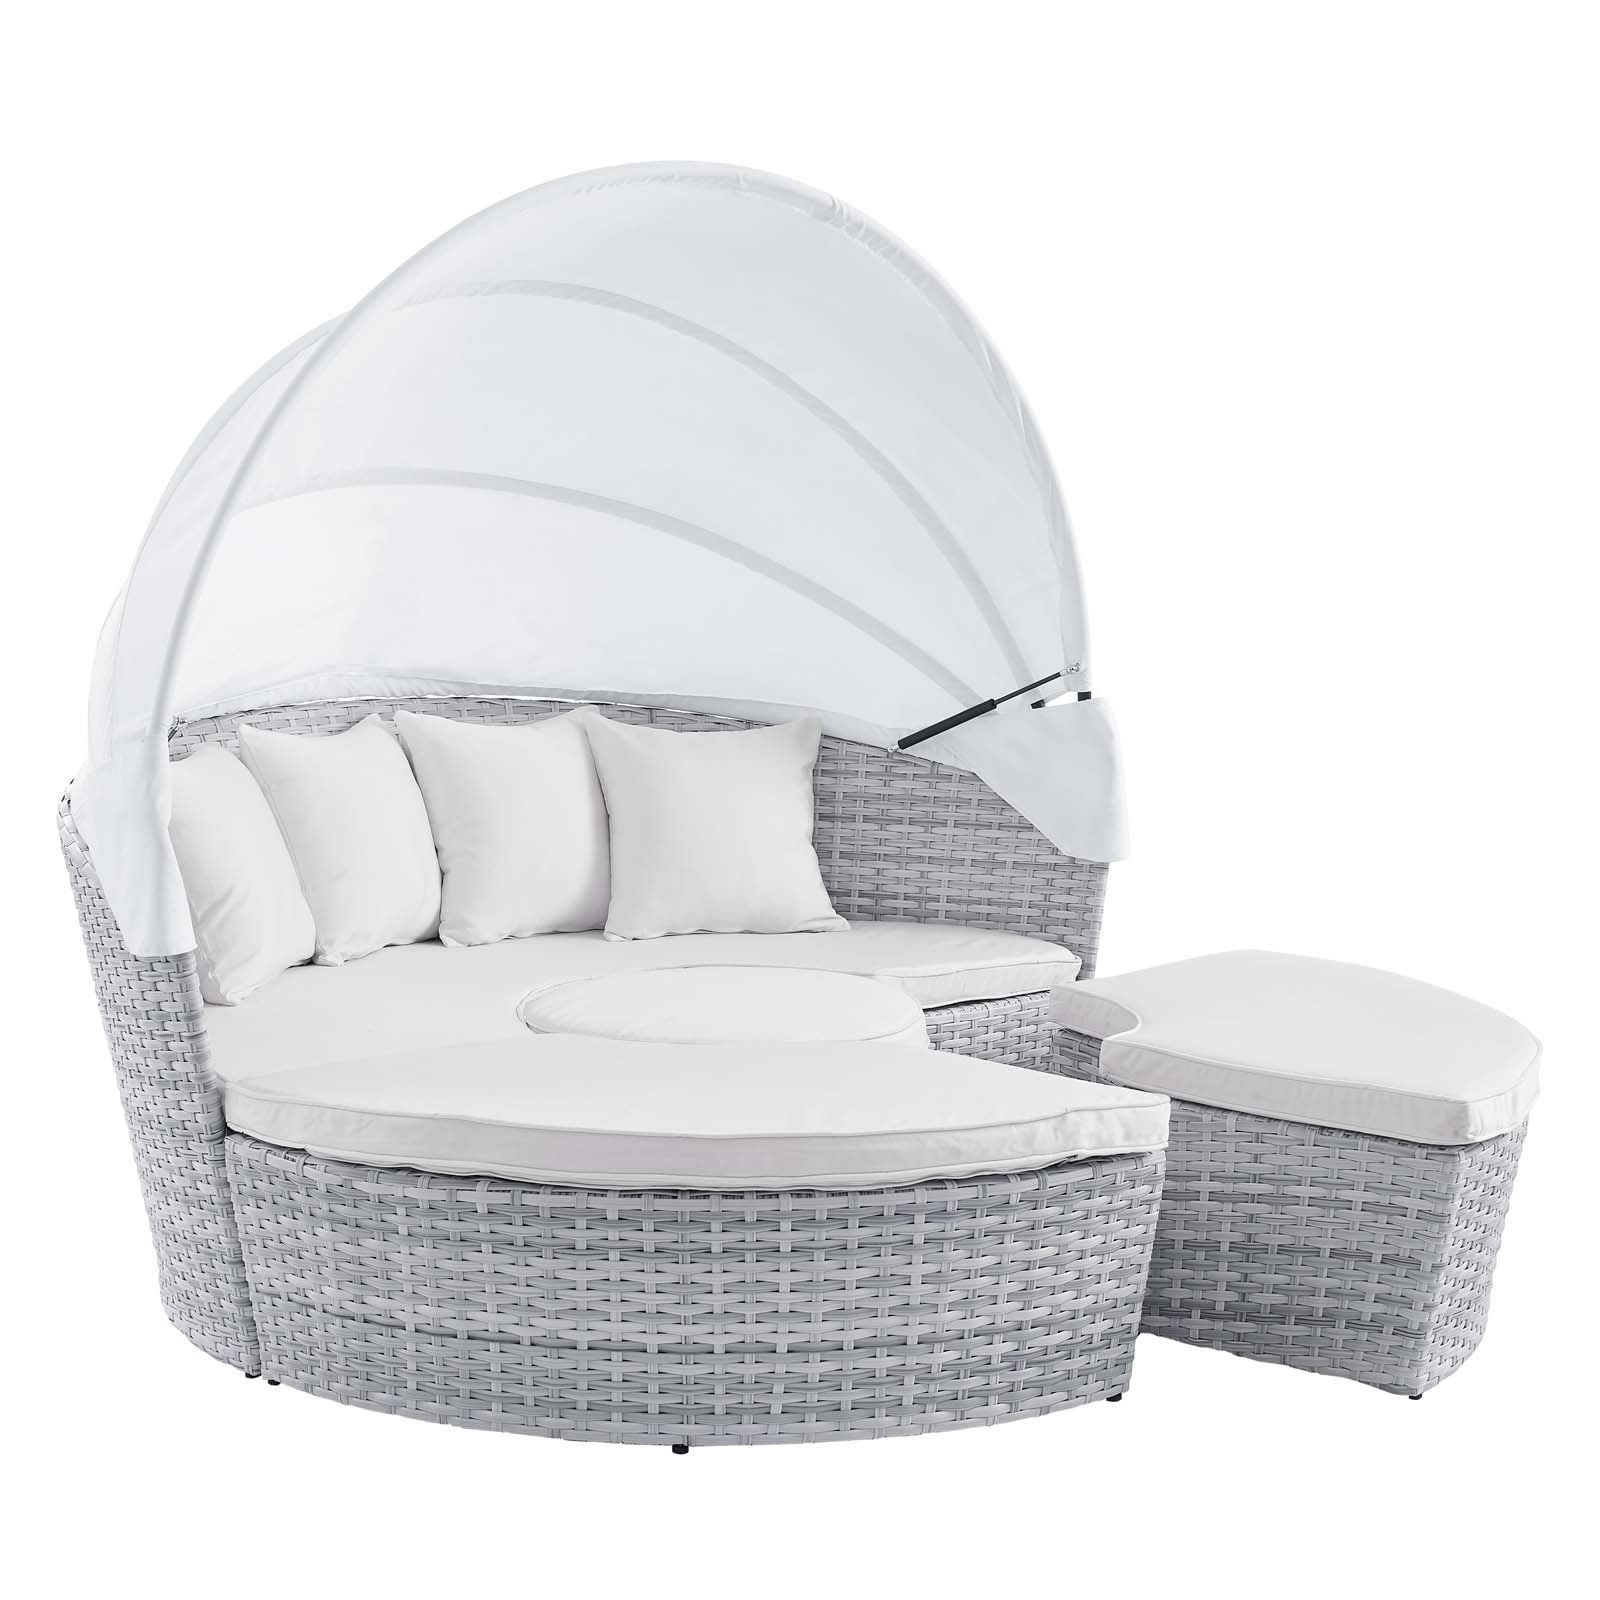 Modway Patio Daybeds - Scottsdale Canopy Outdoor Patio Daybed Light Gray White